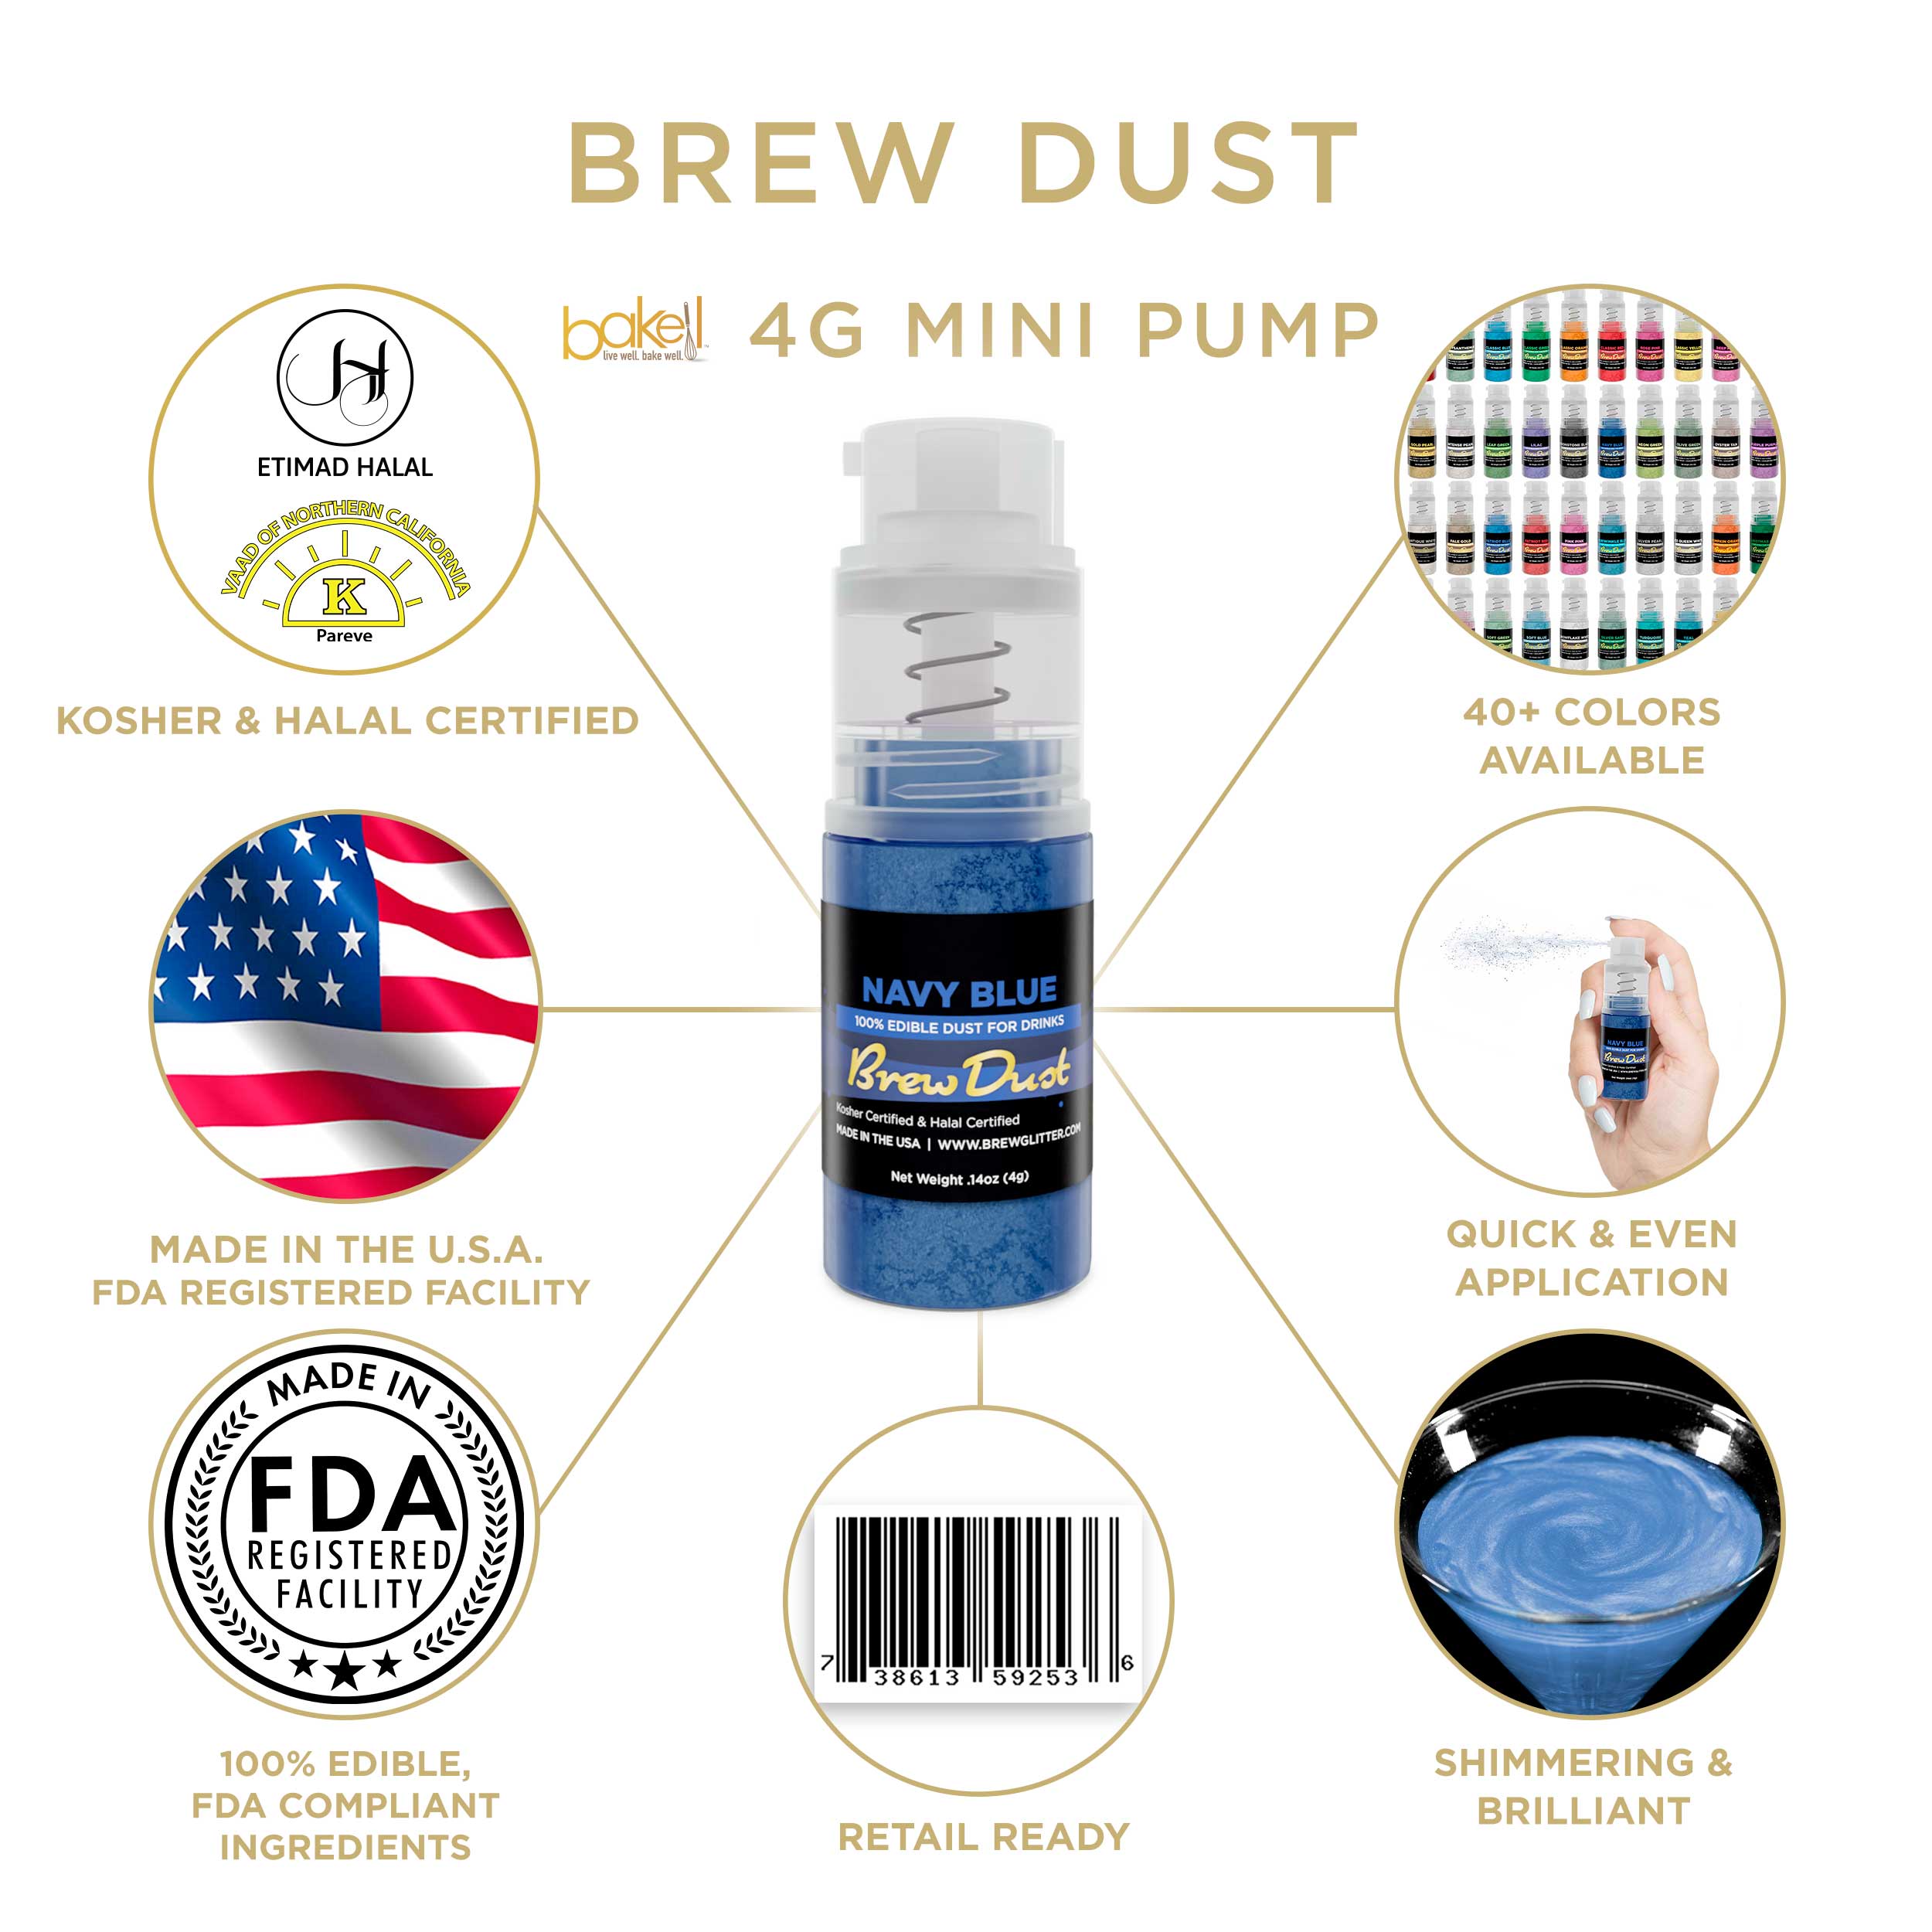 Navy Blue Brew Dust Miniature Spray Pump | Infographic and Information